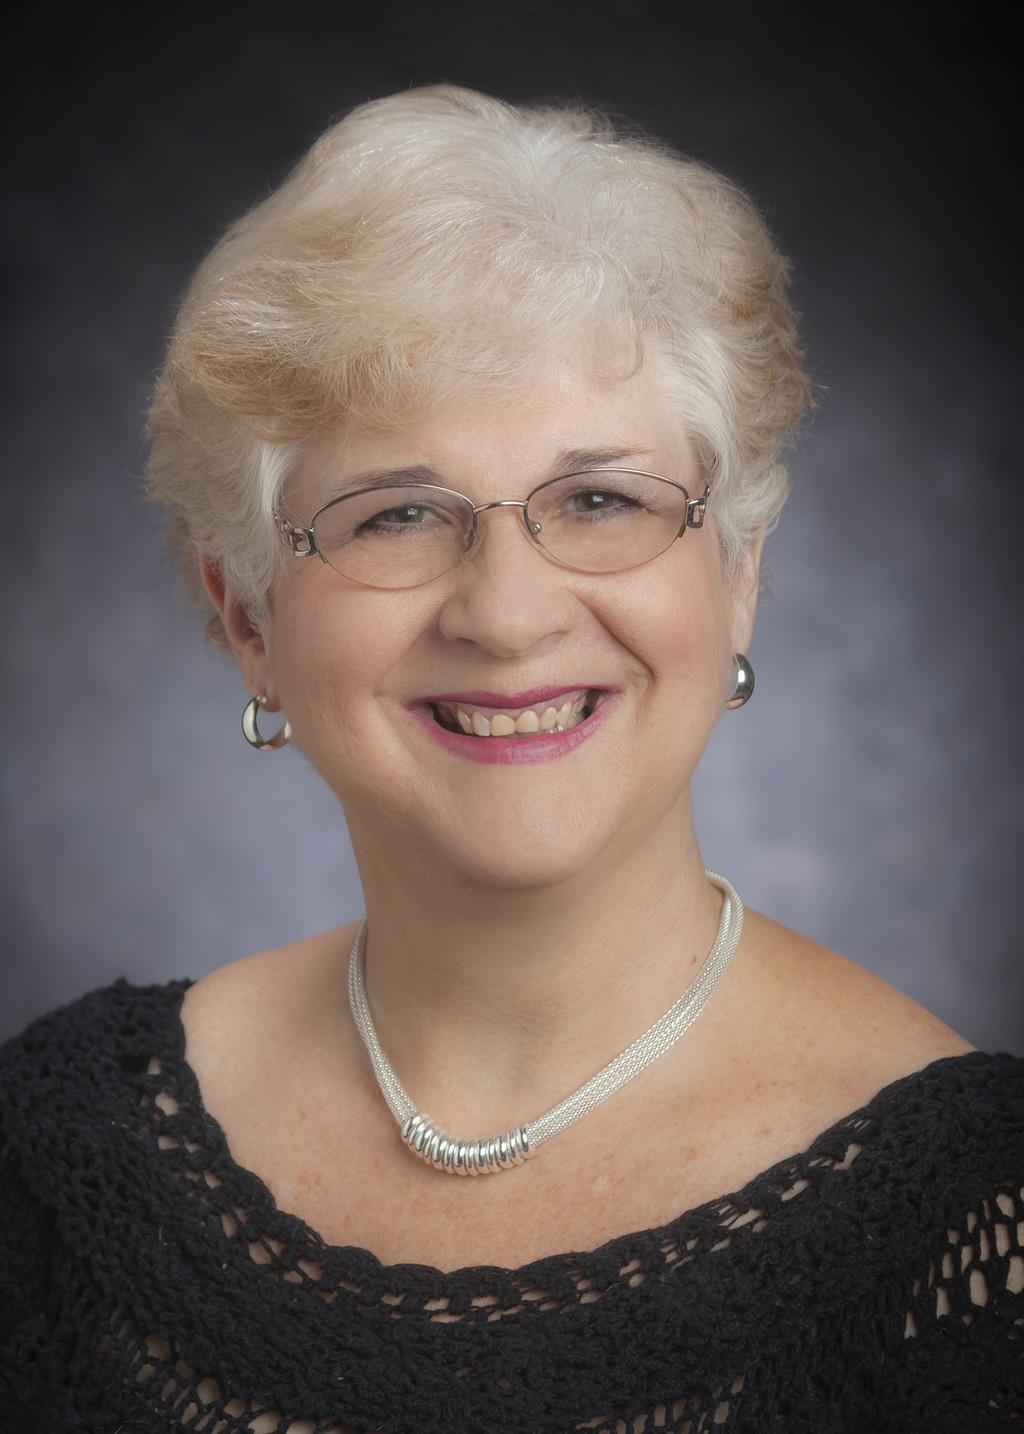 Meet the Author Patti DeWitt Folkerts is a music educator and composer and living in the Austin, Texas area.